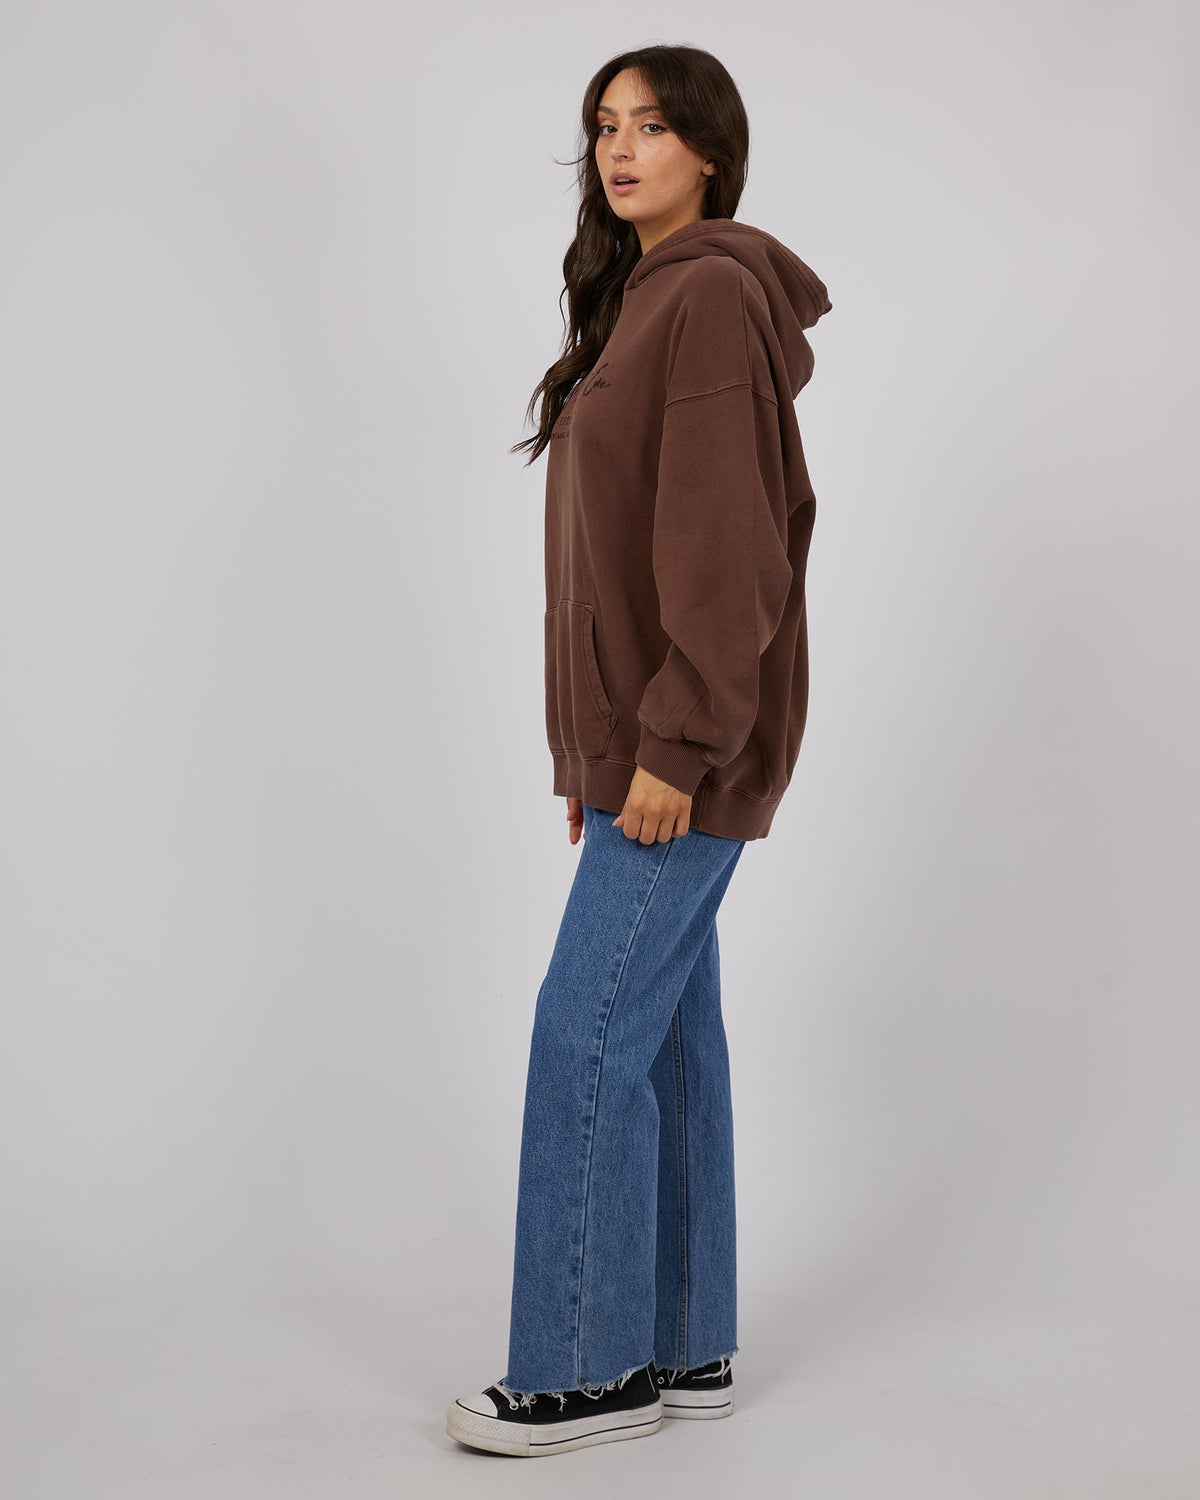 All About Eve-Classic Hoodie Brown-Edge Clothing